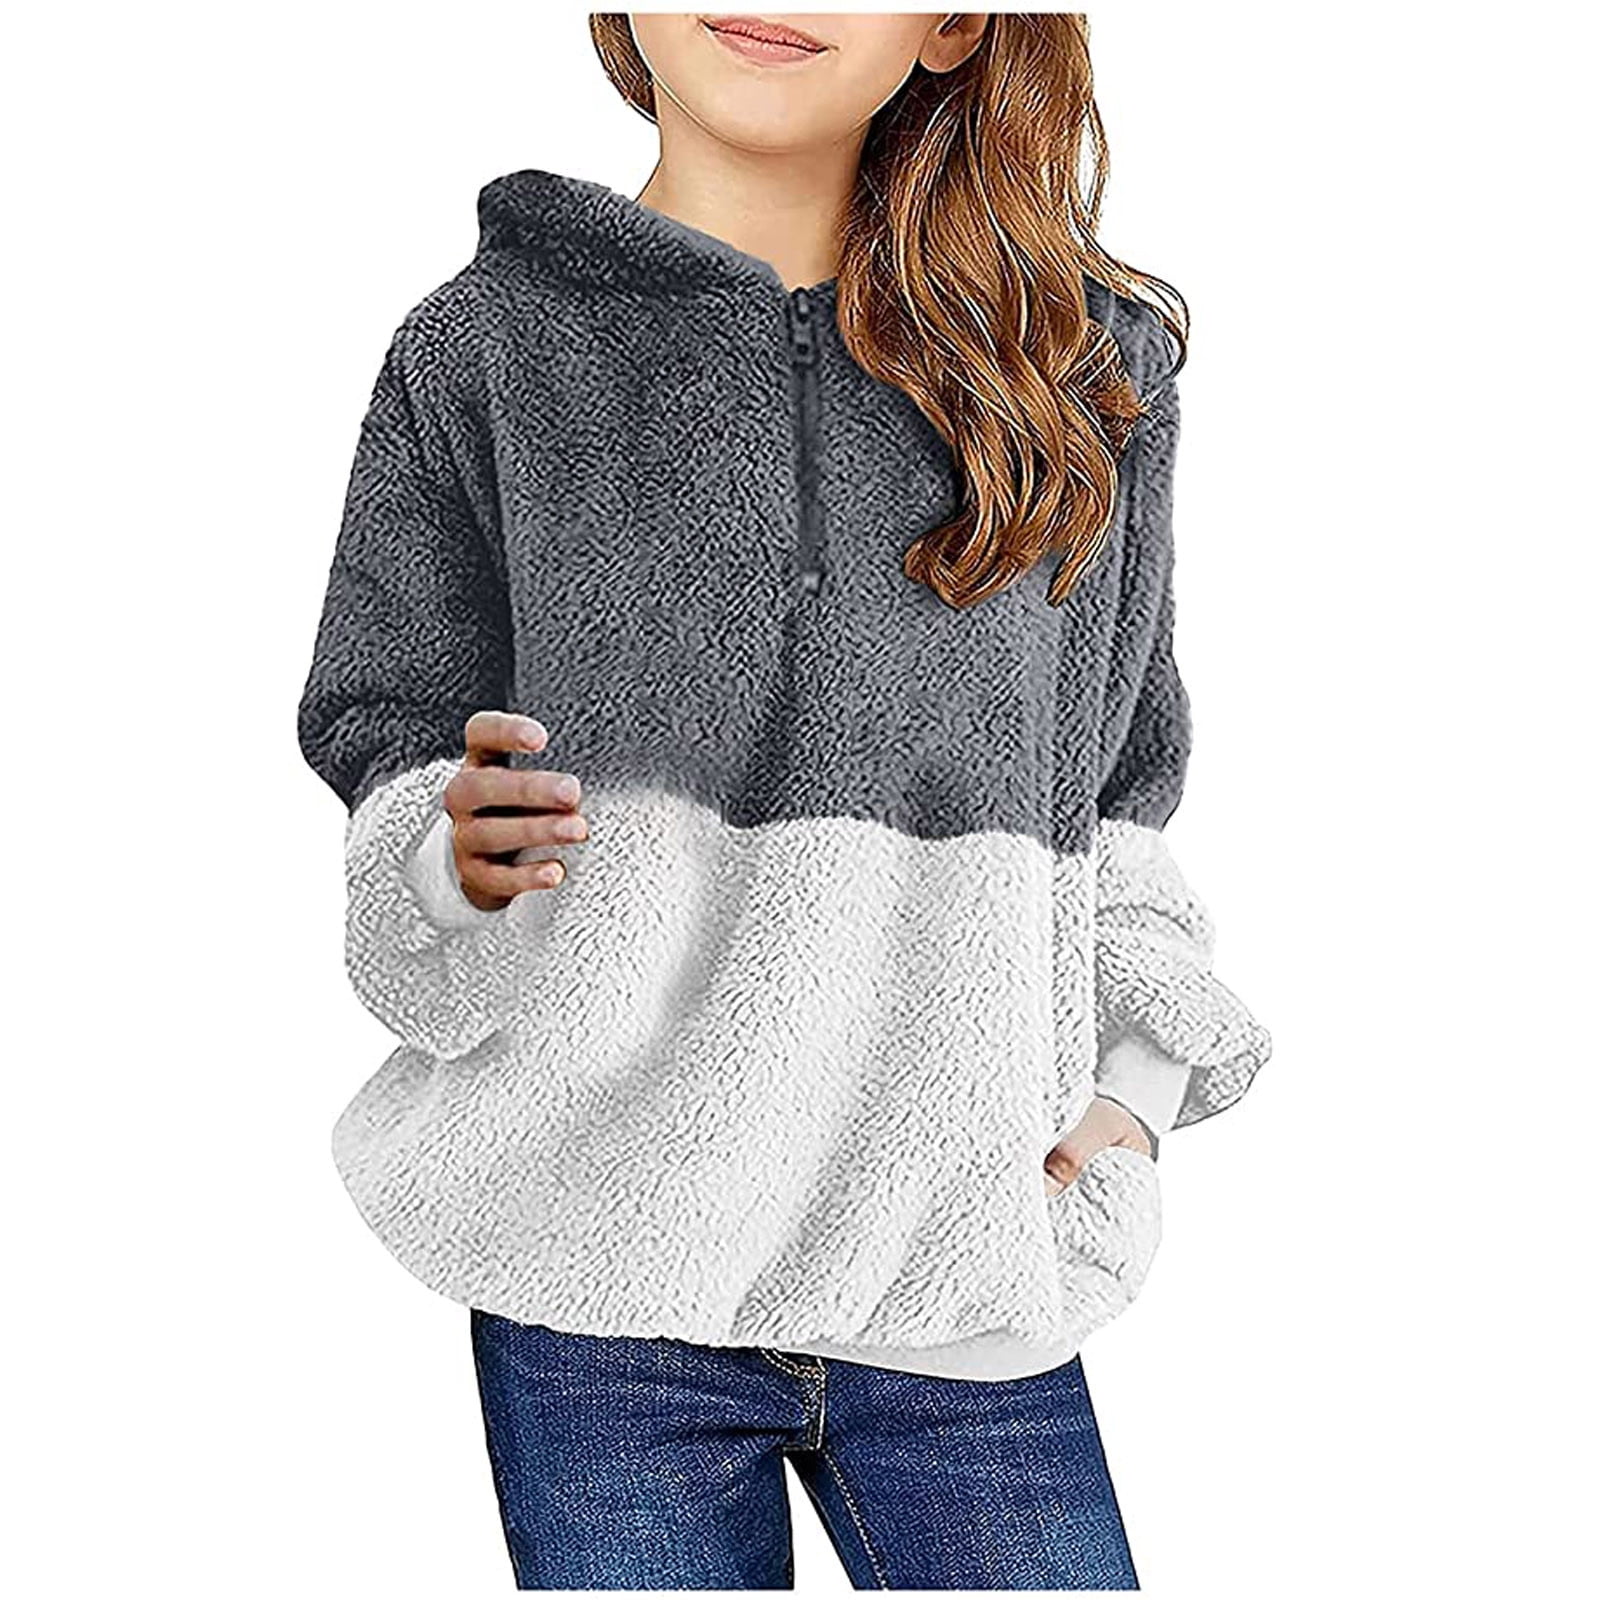 Fall Clearance Sale! YYDGH Girls Fuzzy Fleece Pullover Hoodies